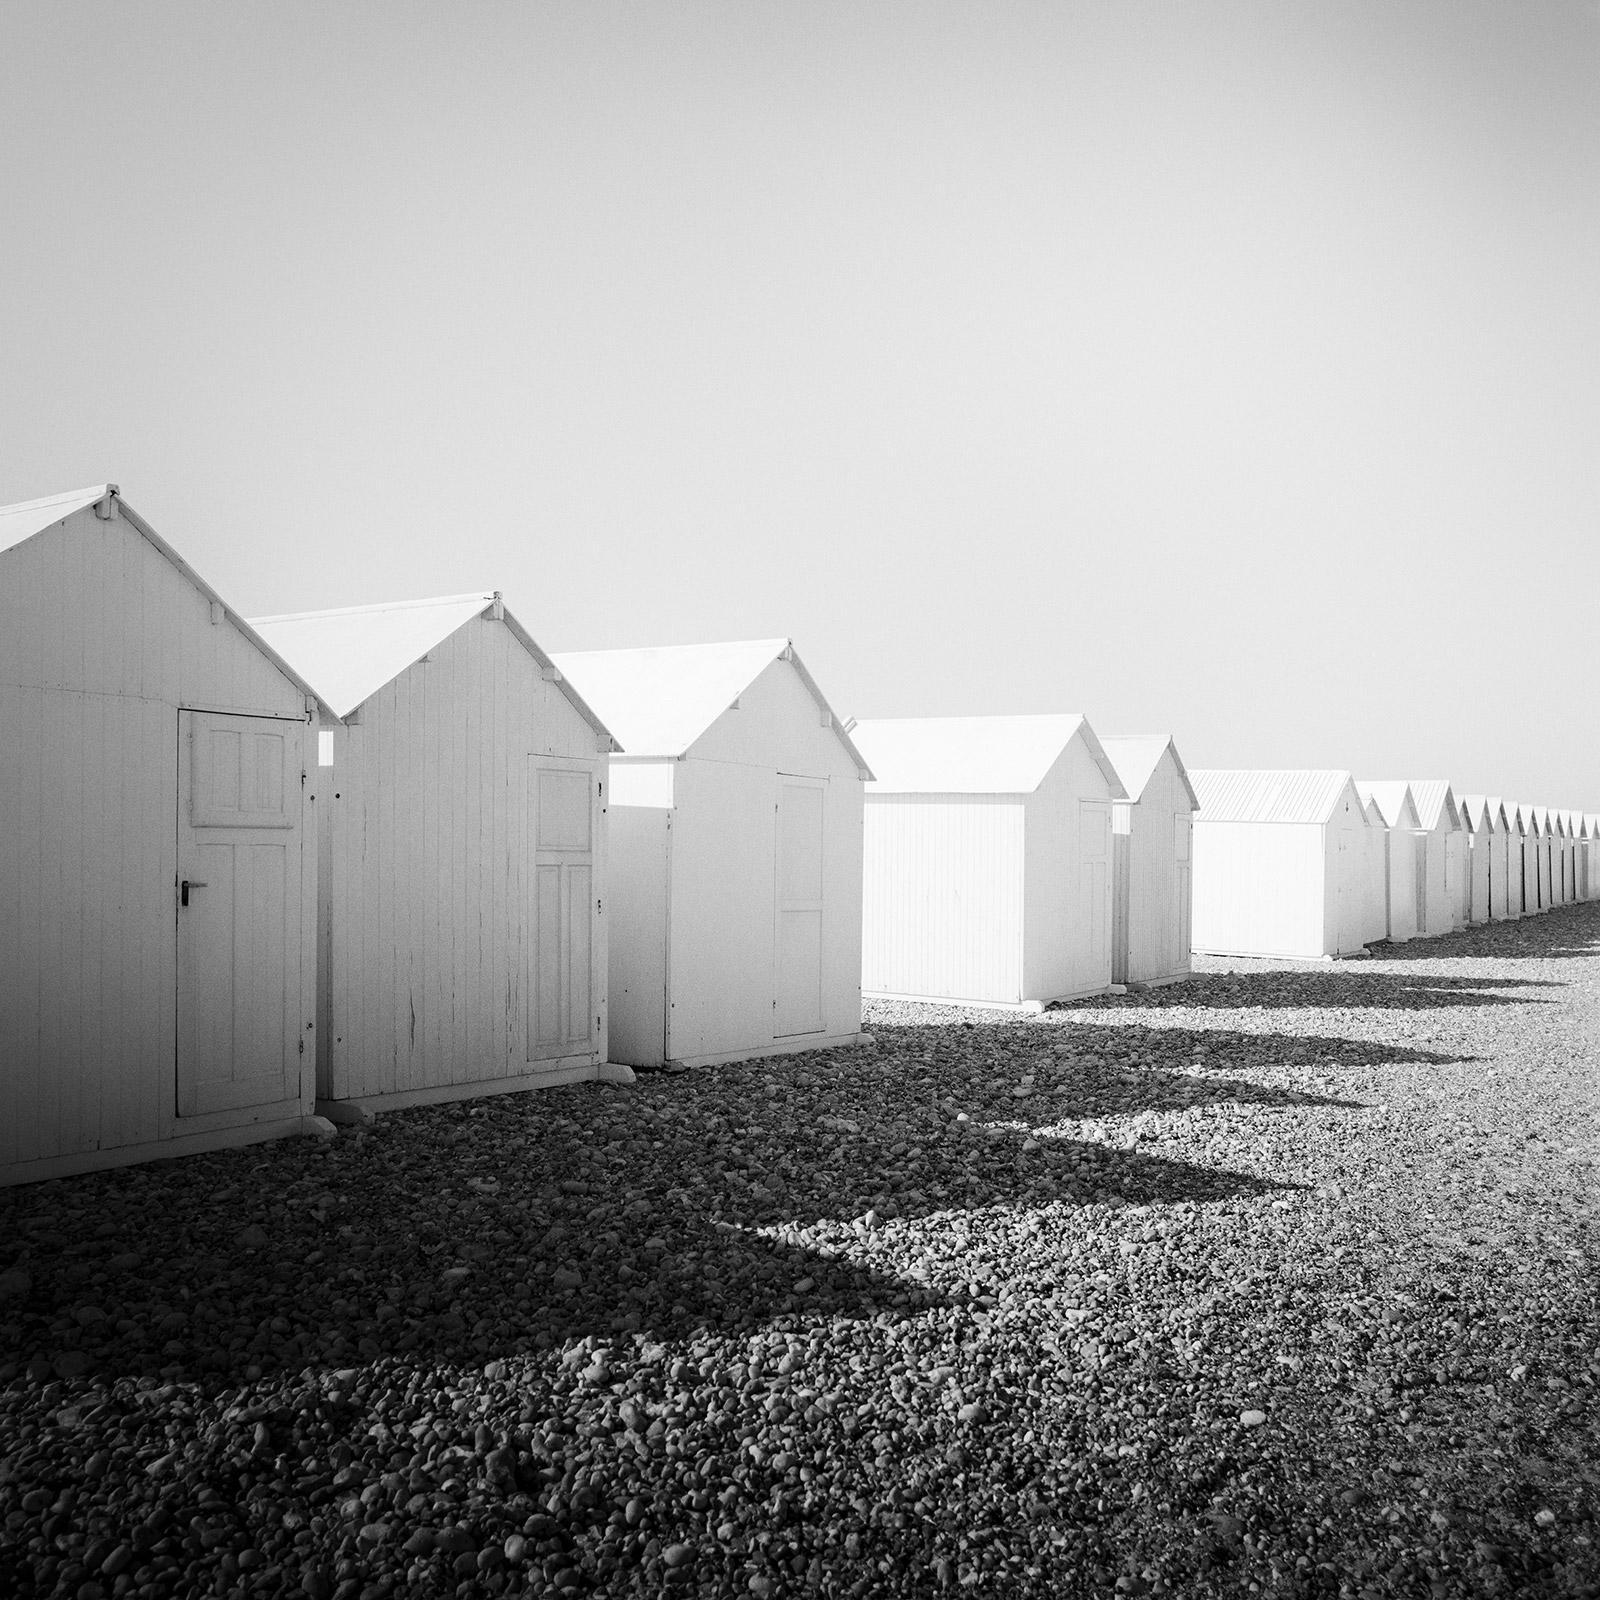 Row of Beach Huts, rocky beach, Black and White fine art landscape photography